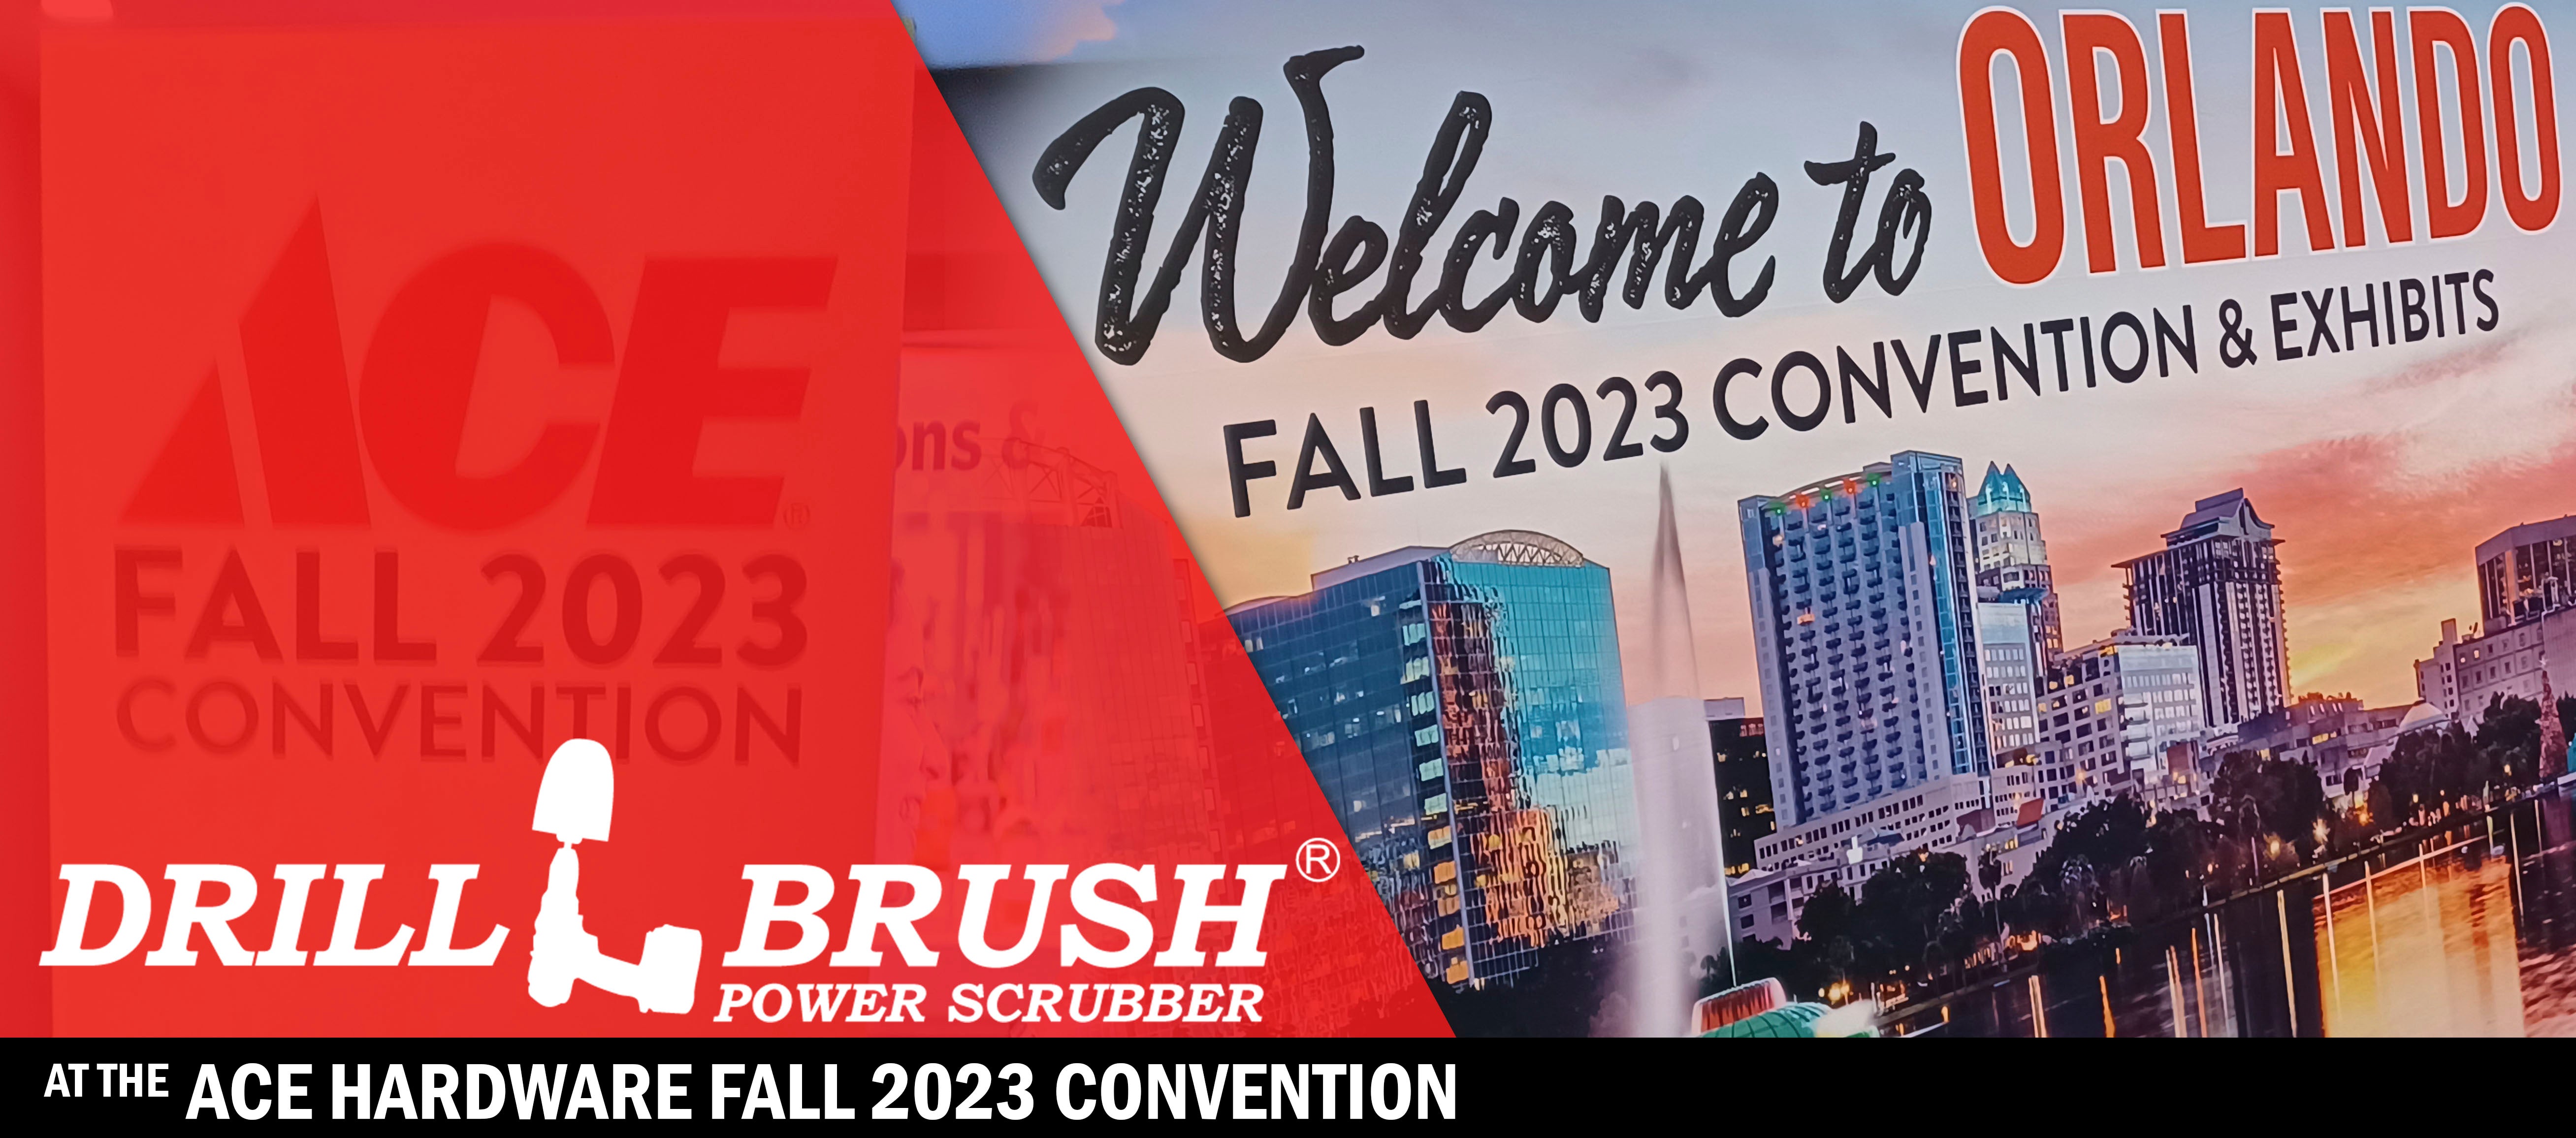 Drillbrush at the 2023 Fall ACE Hardware Convention